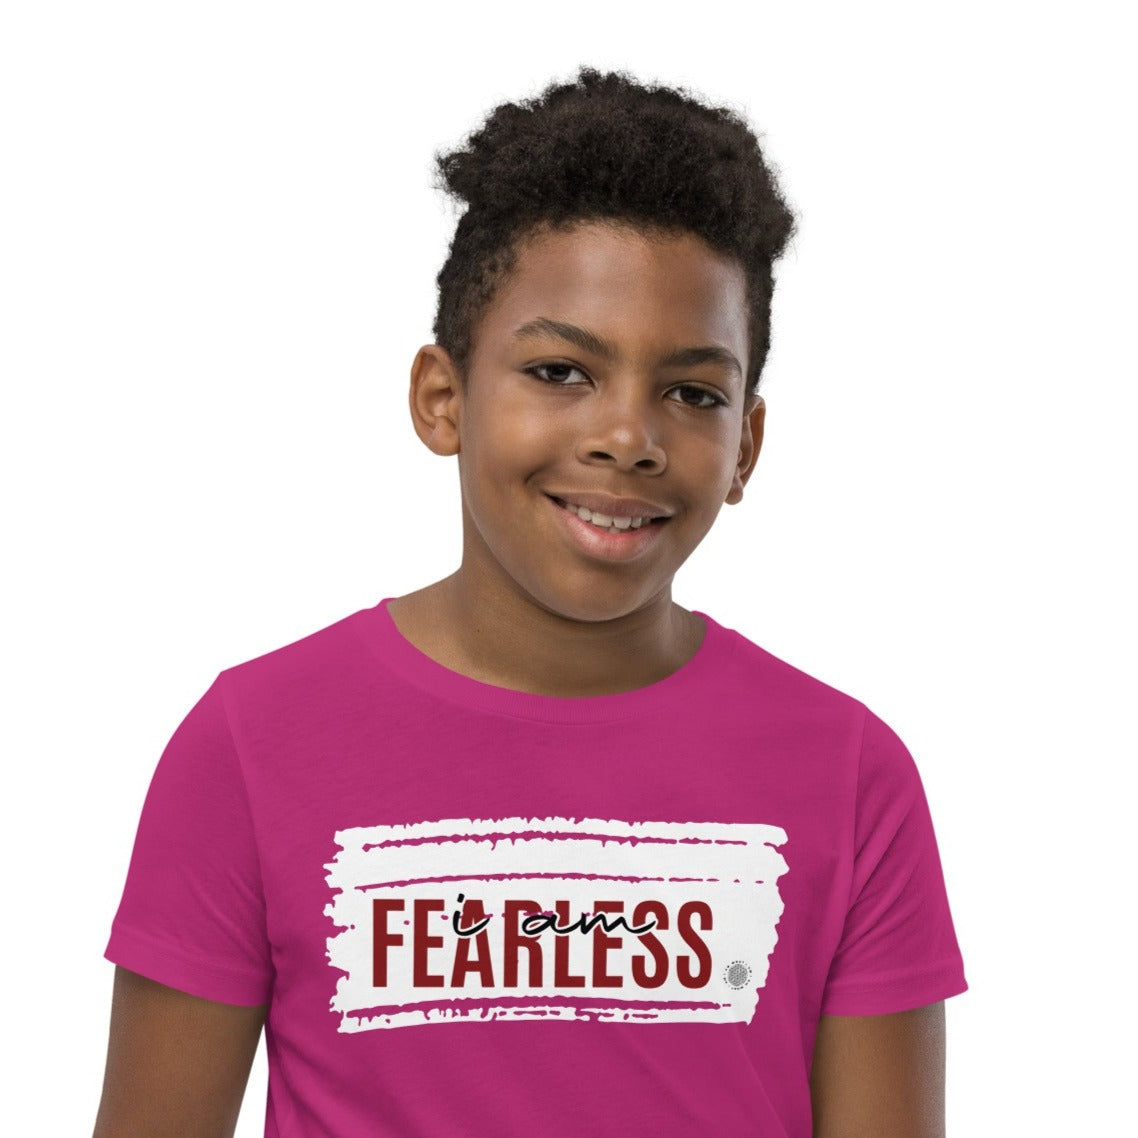 Our ‘I Am Fearless’ affirmation youth t-shirt describes your son or daughter who is set on rock climbing, snowboarding or joining the debate team. Your child has no fear. Motivational quotes build their confidence.